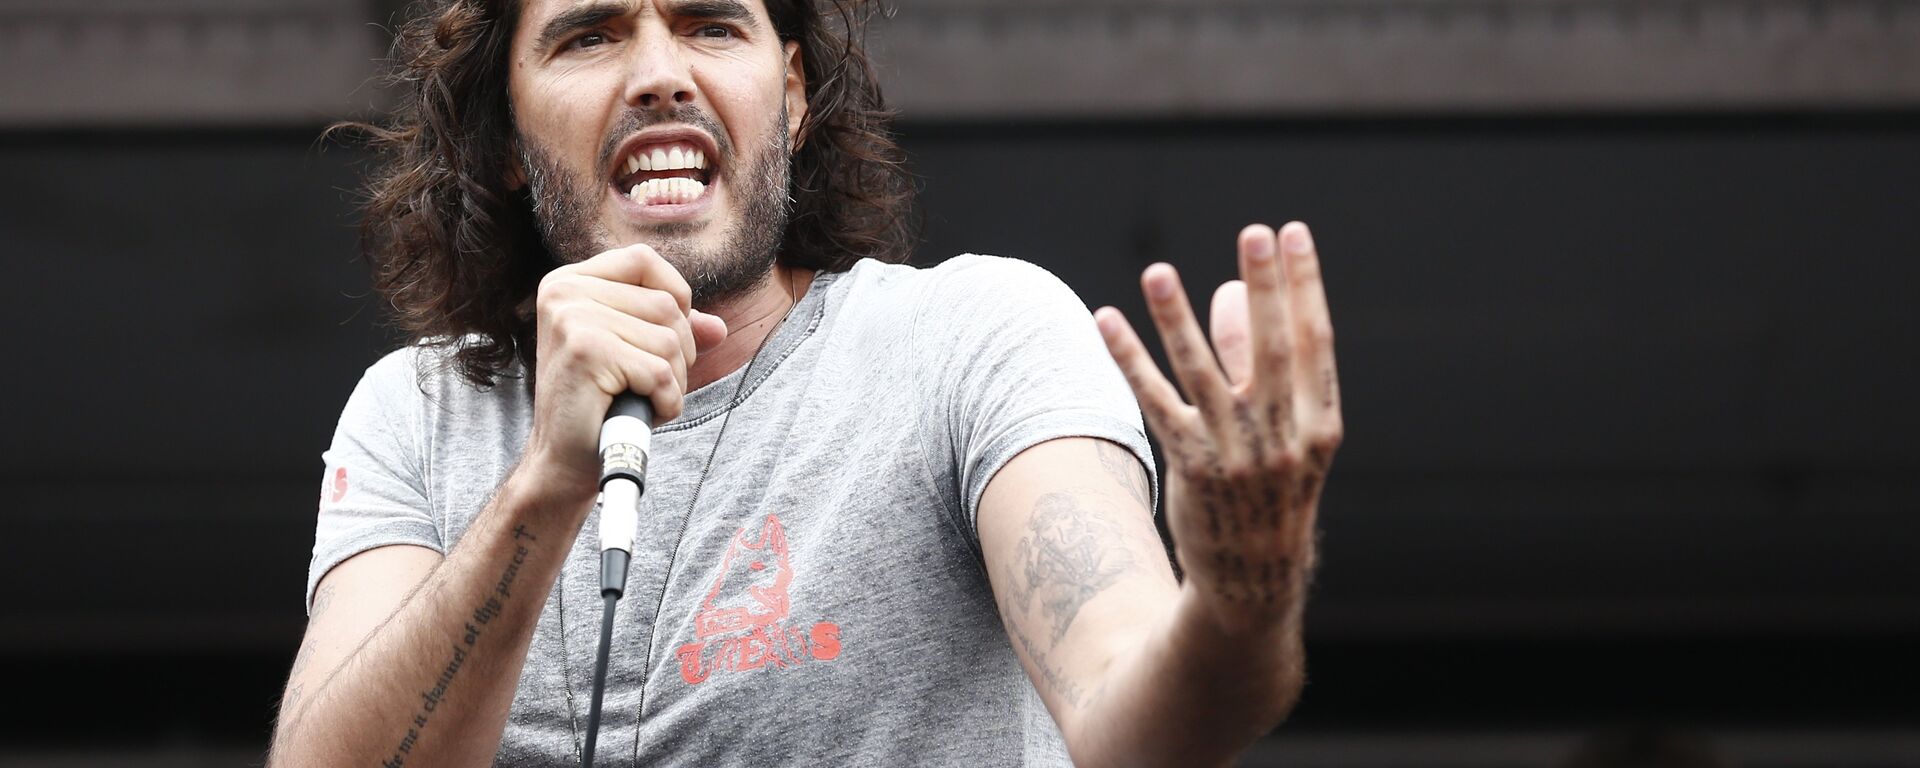 British comedian Russell Brand speaks to protesters following a march against the British government's spending cuts and austerity measures in London on June 20, 2015. - Sputnik International, 1920, 19.09.2016